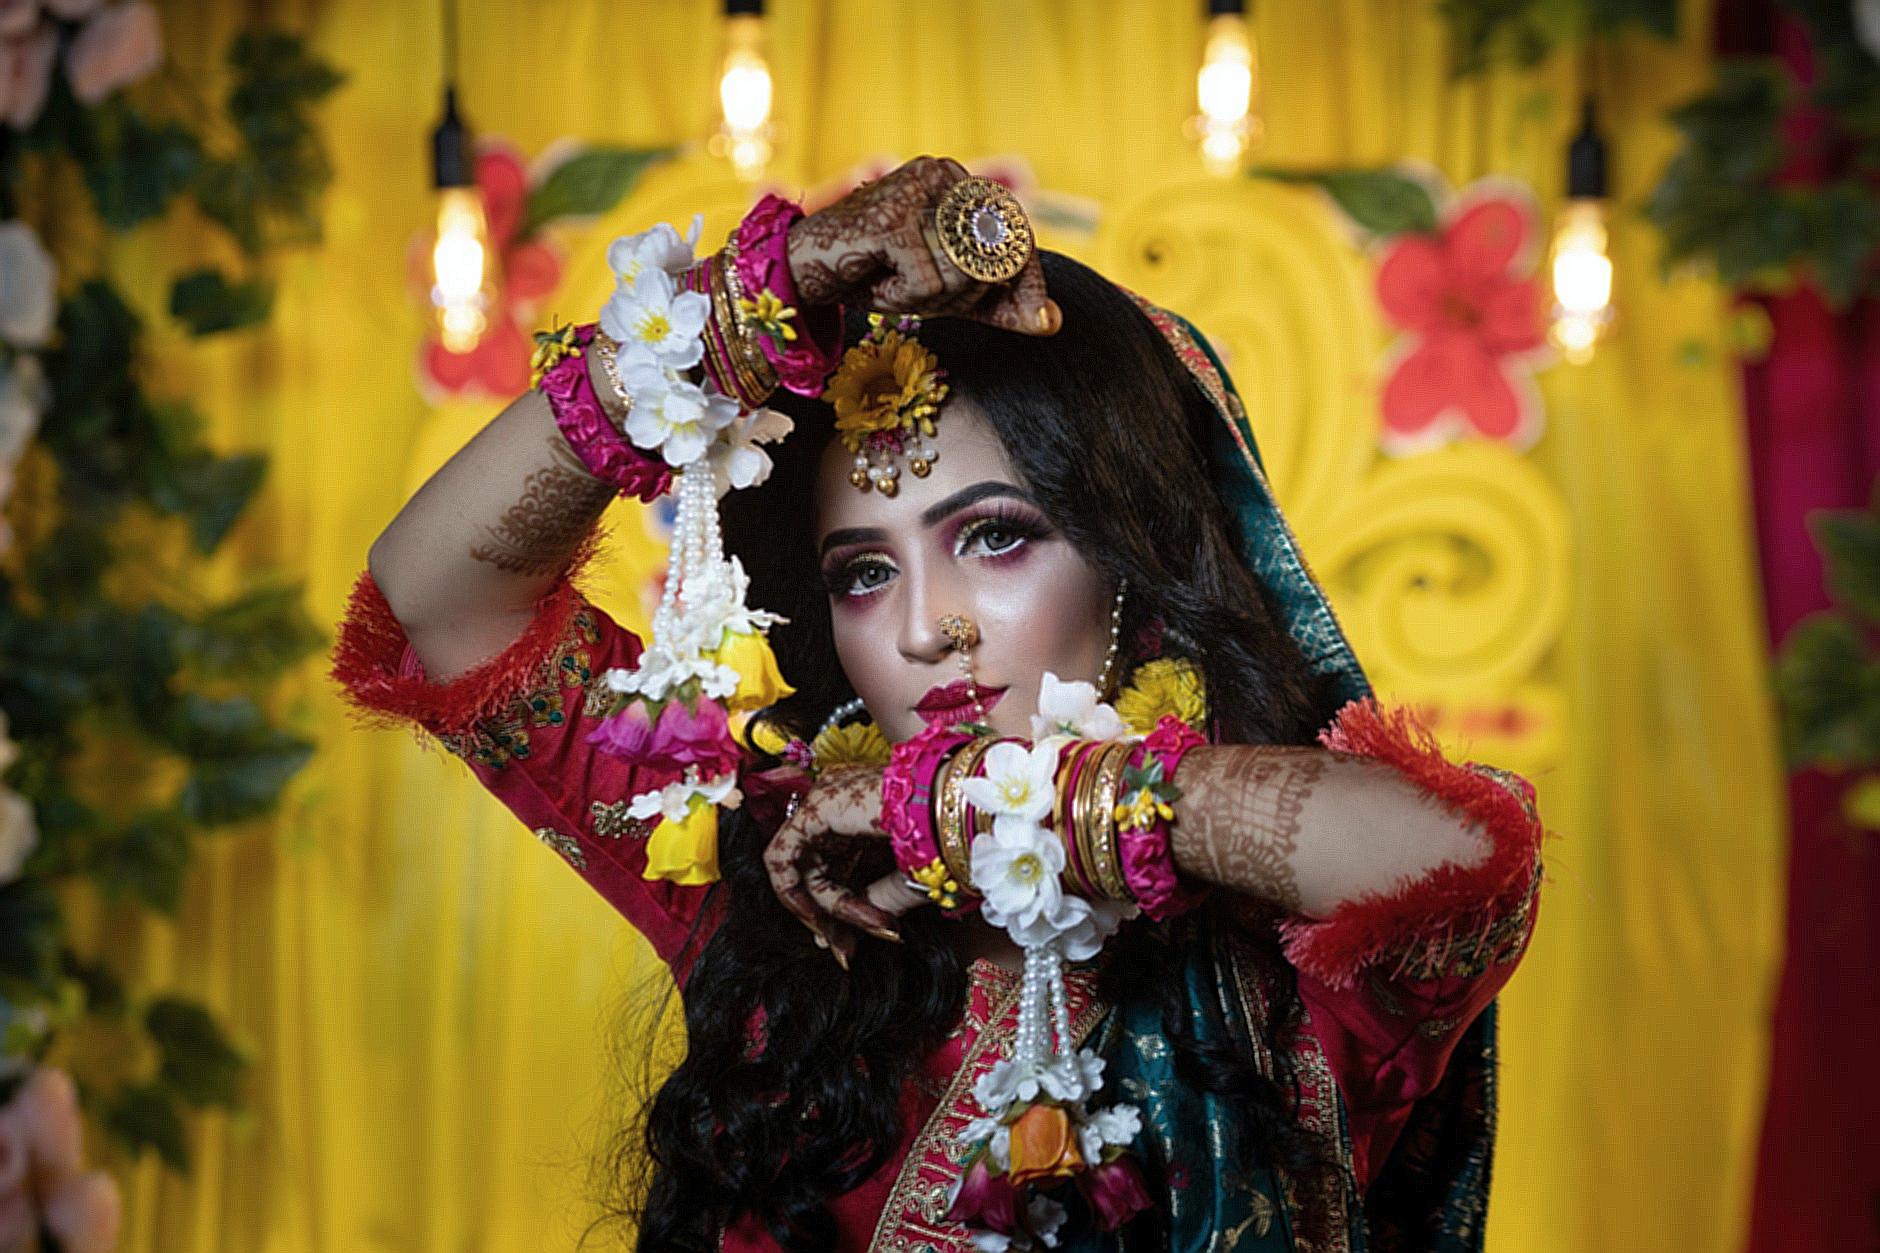 Photo of a Brunette Woman Wearing Traditional Bracelets and Artificial Flower Decoration